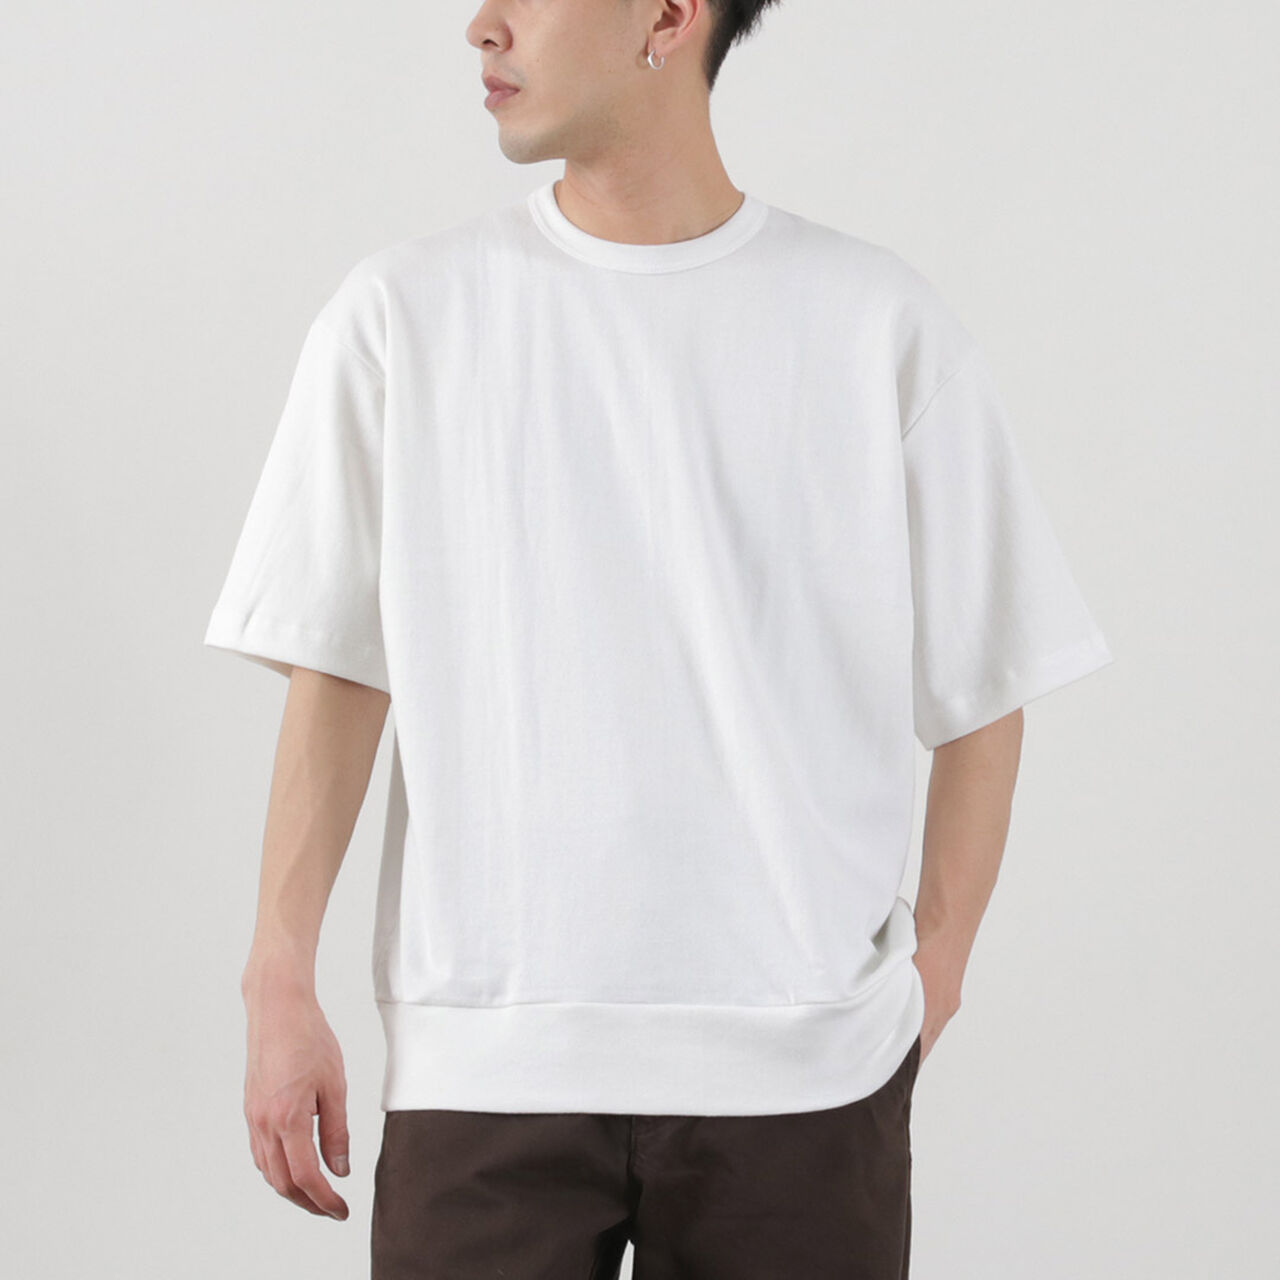 TONNNO Relaxed Fit Crew Neck T-Shirt,Bianco, large image number 0